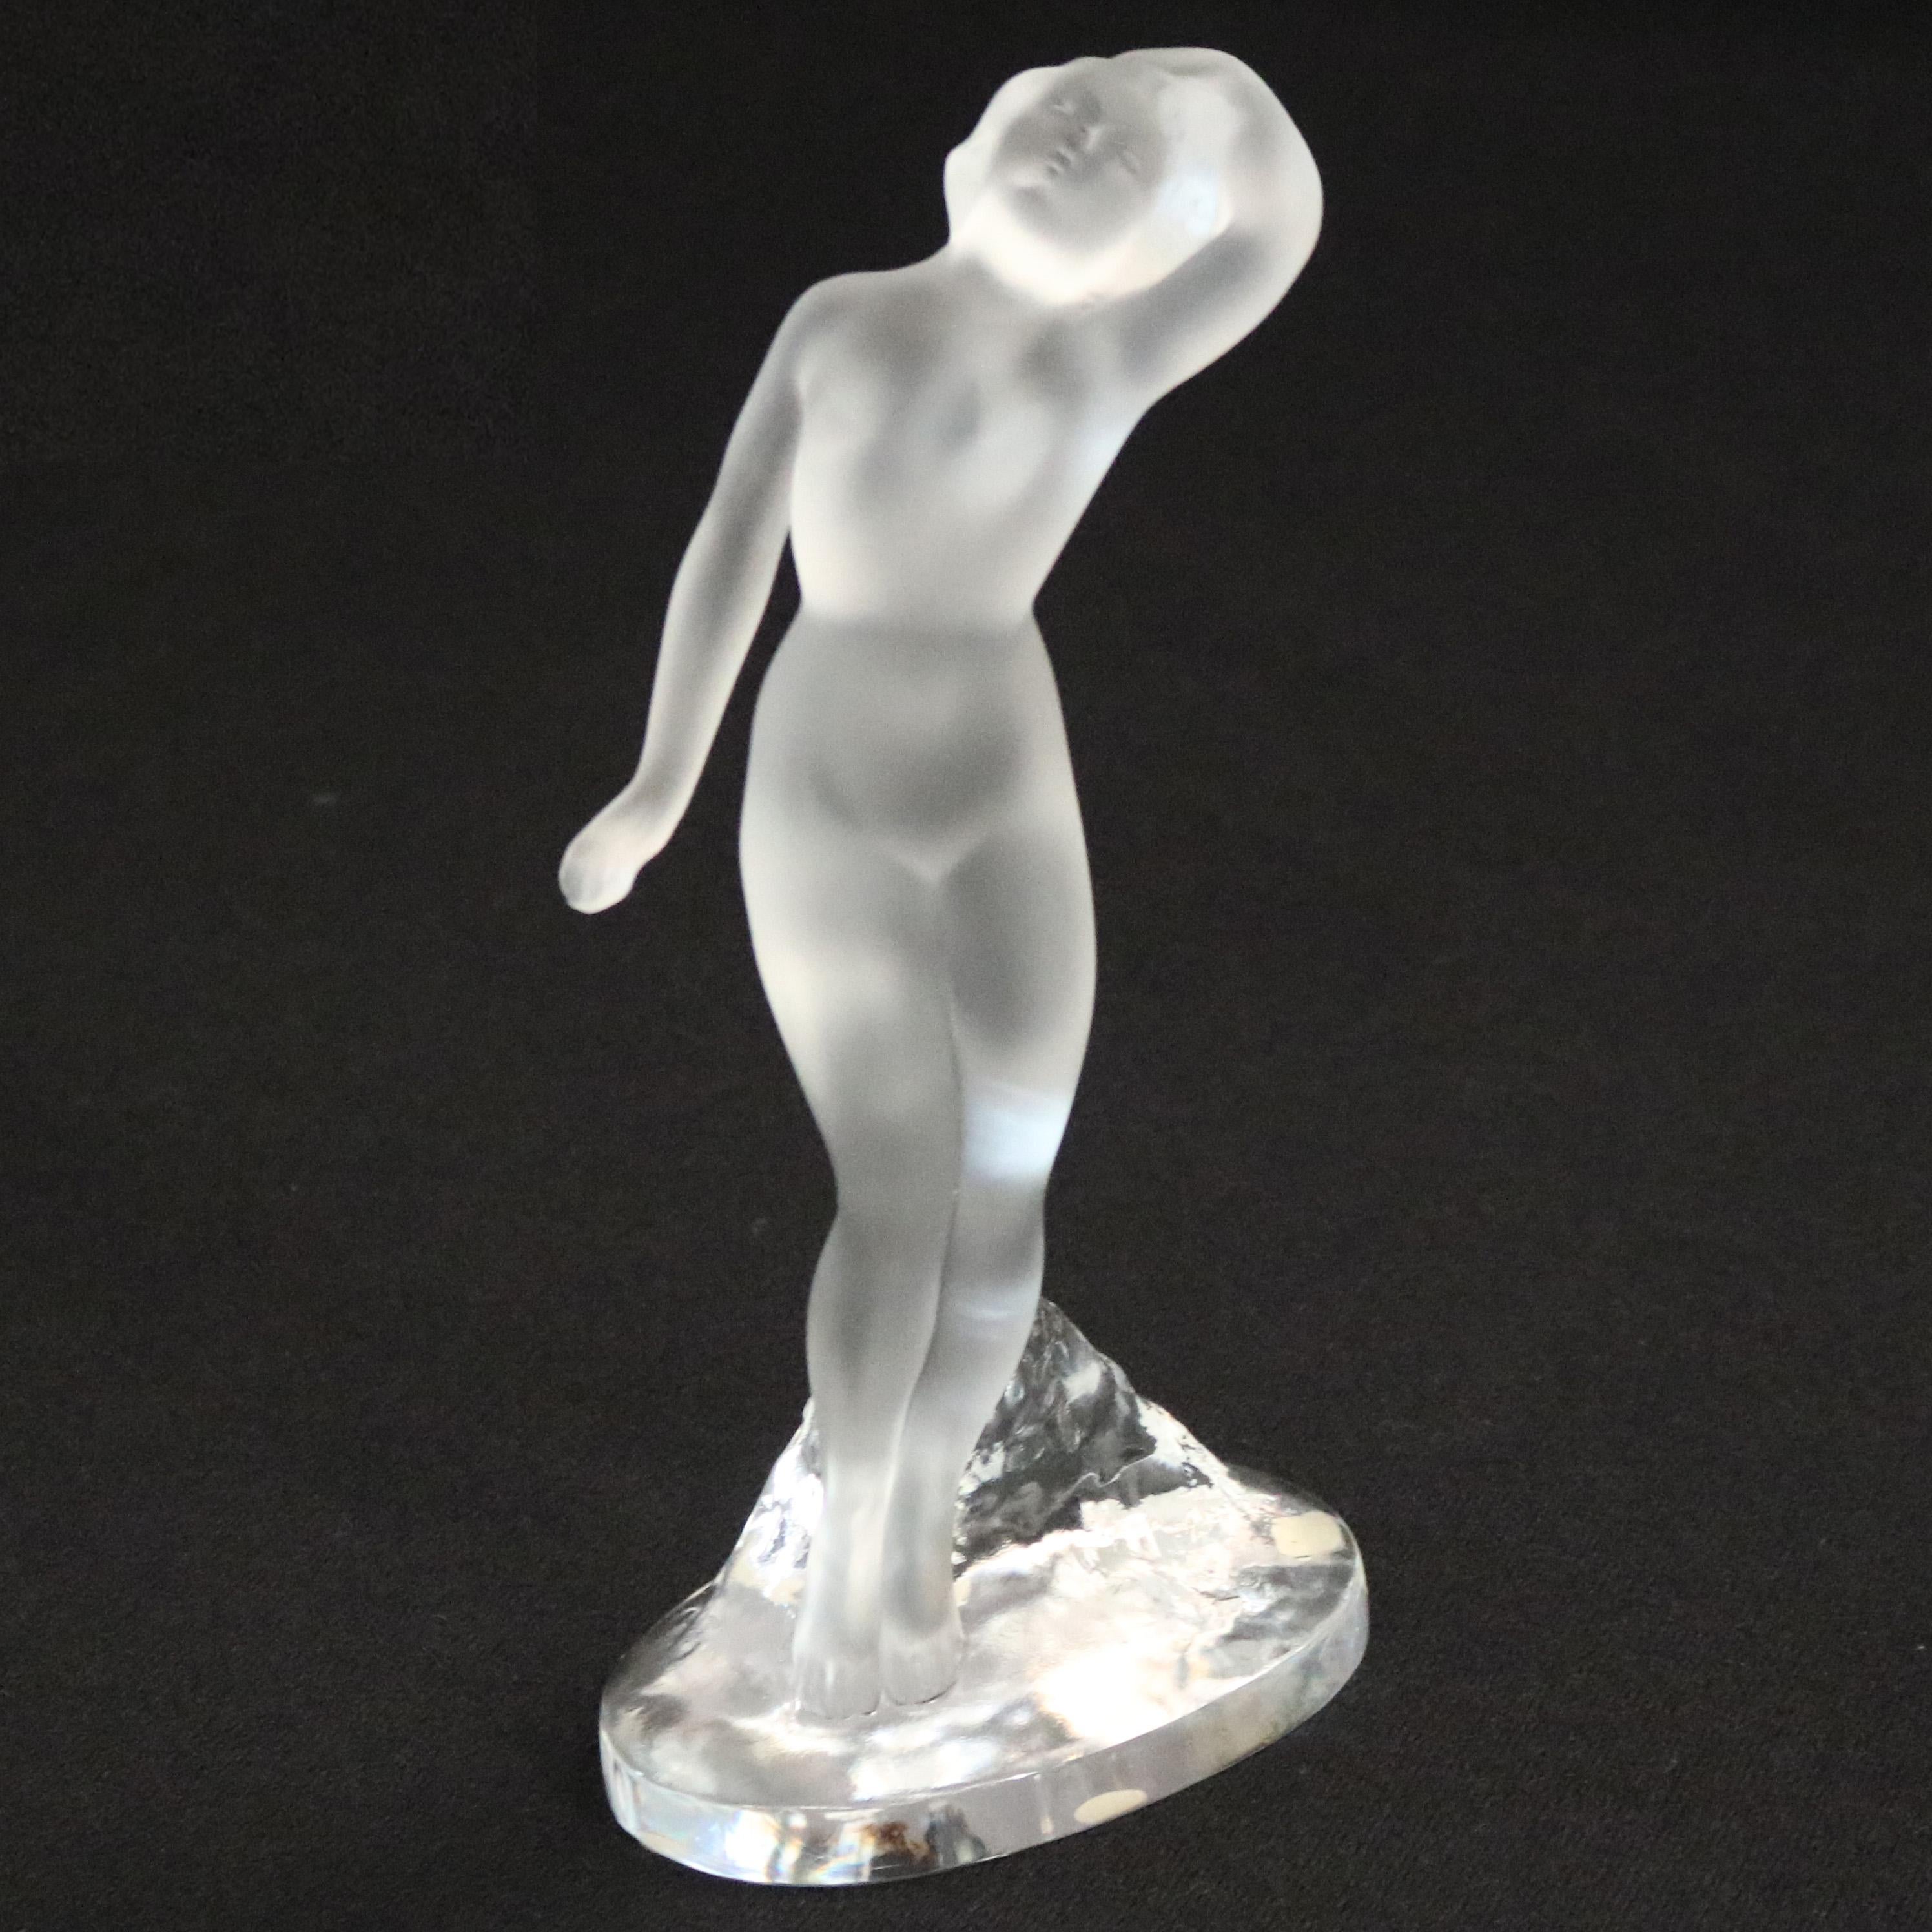 Molded Antique French Lalique Figural Art Glass Vase, circa 1920